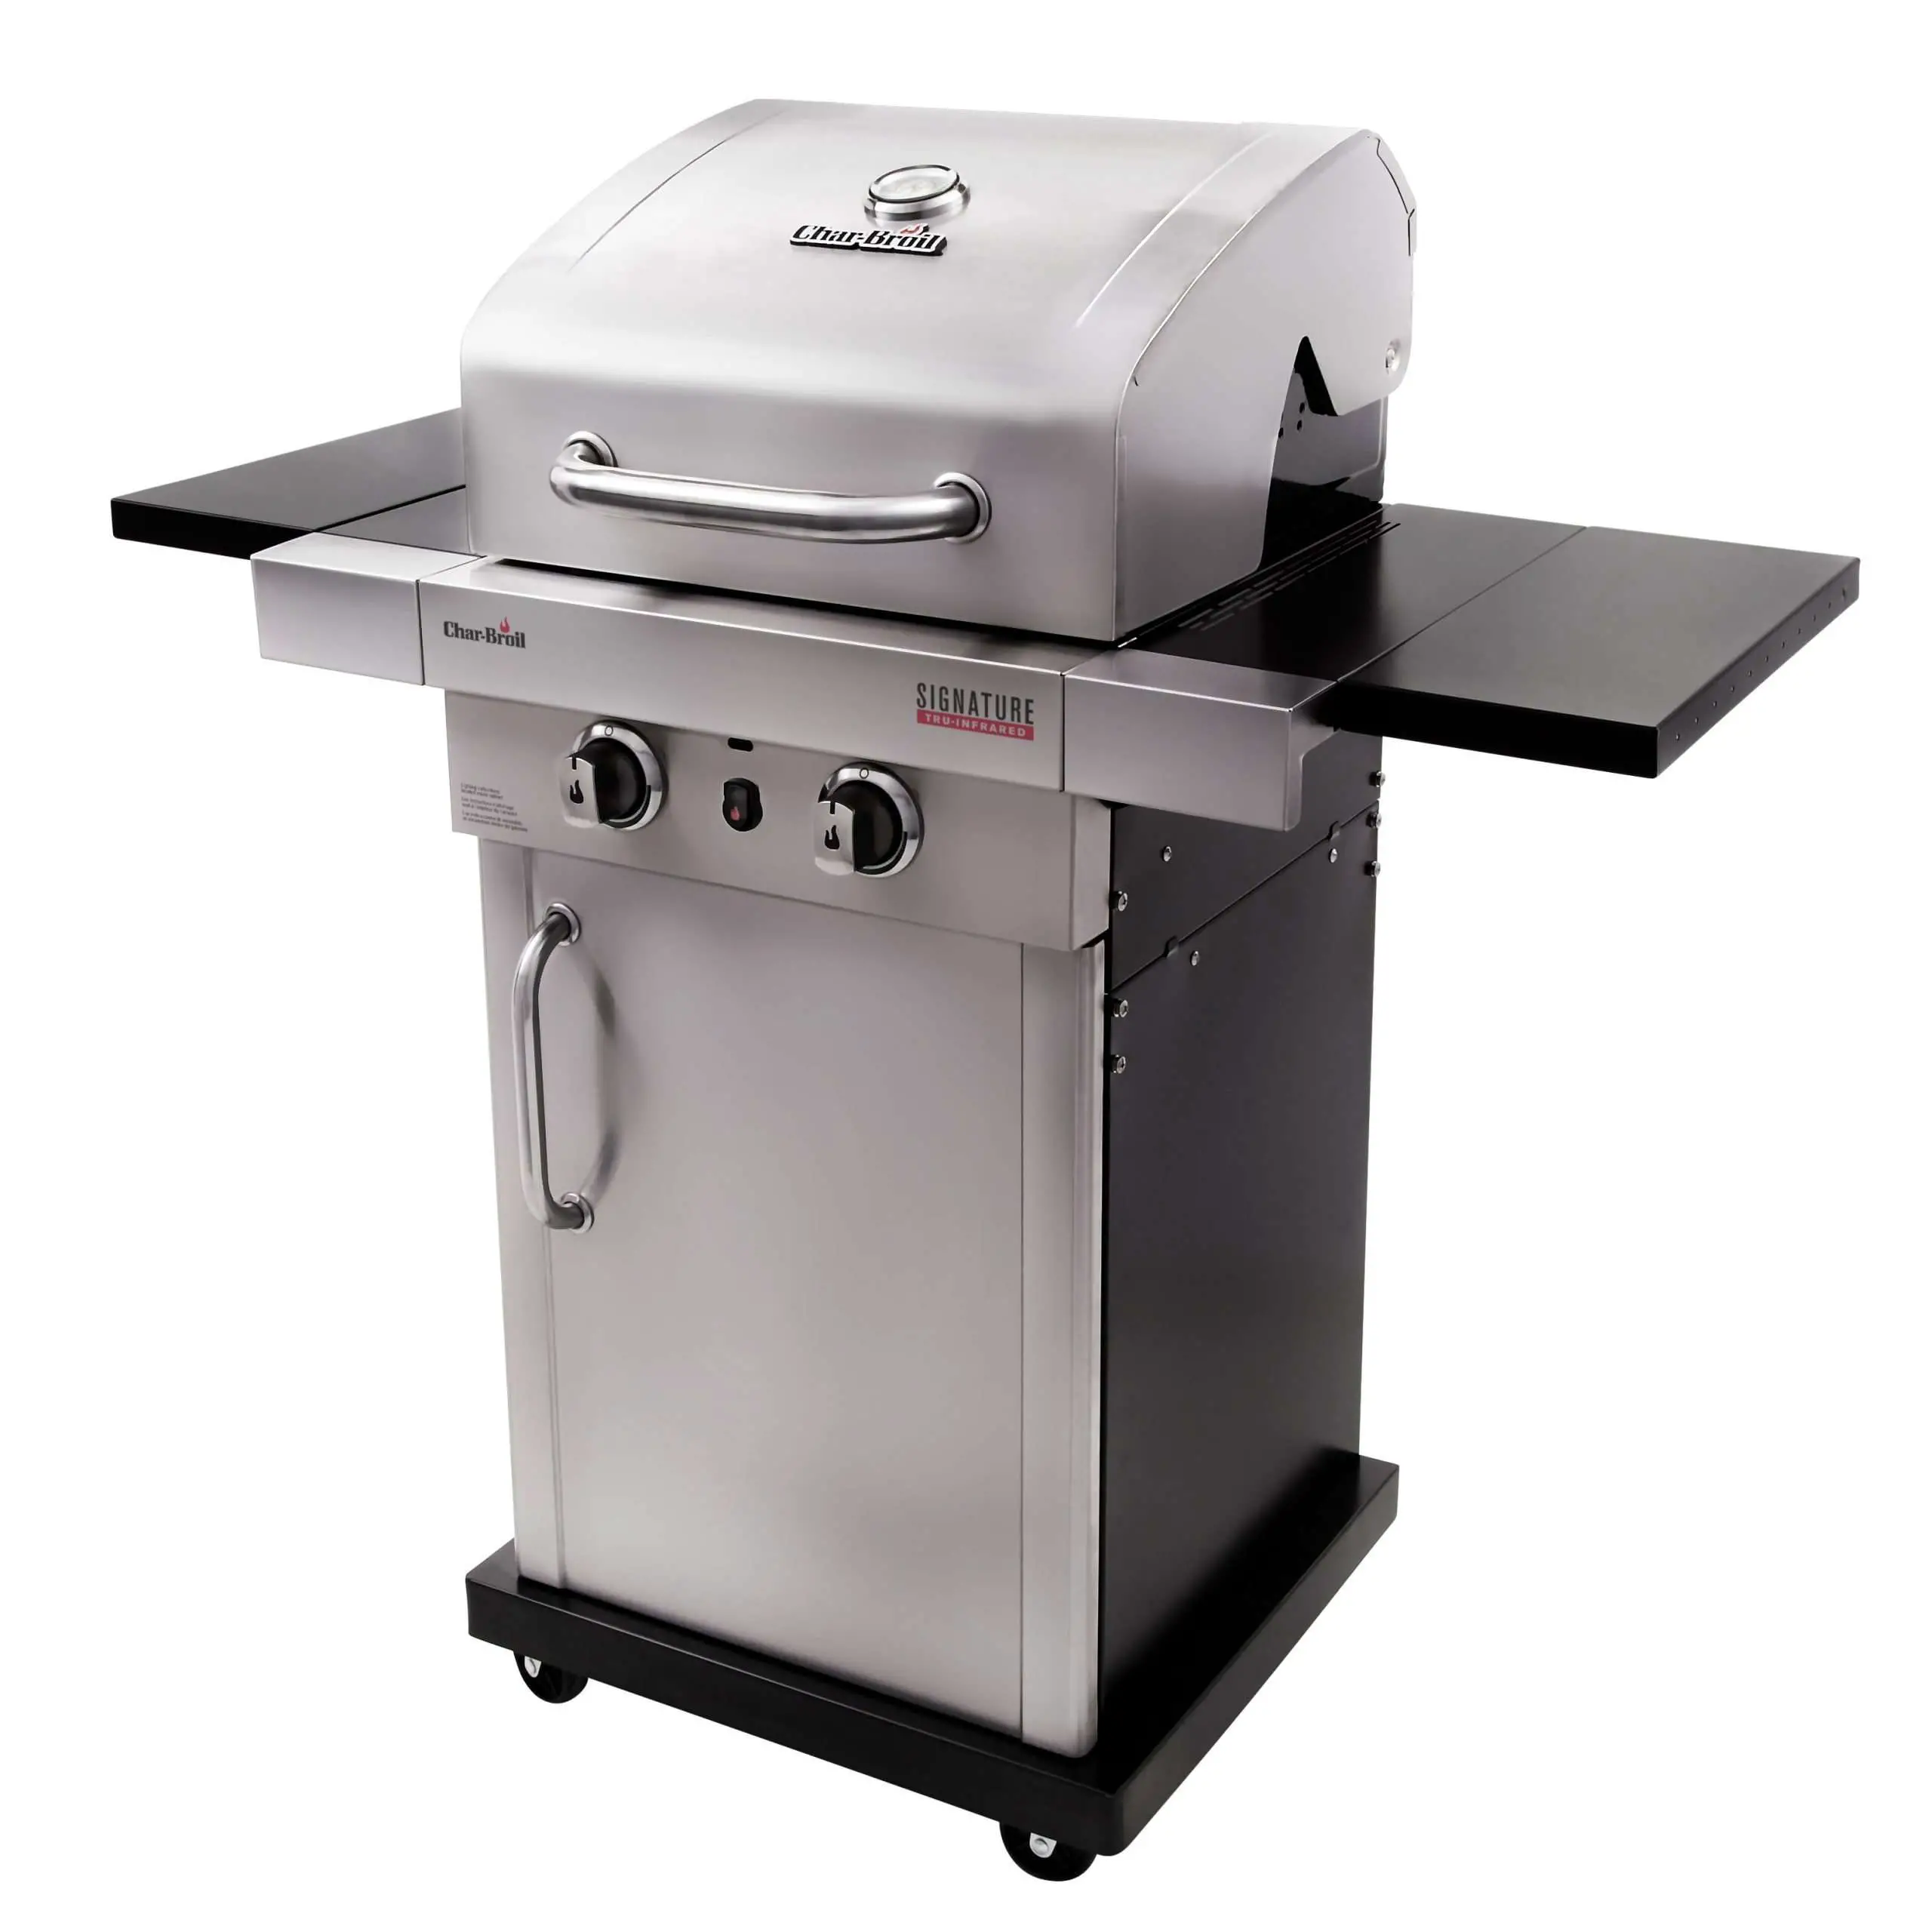 CharBroil Signature InfraRed 2